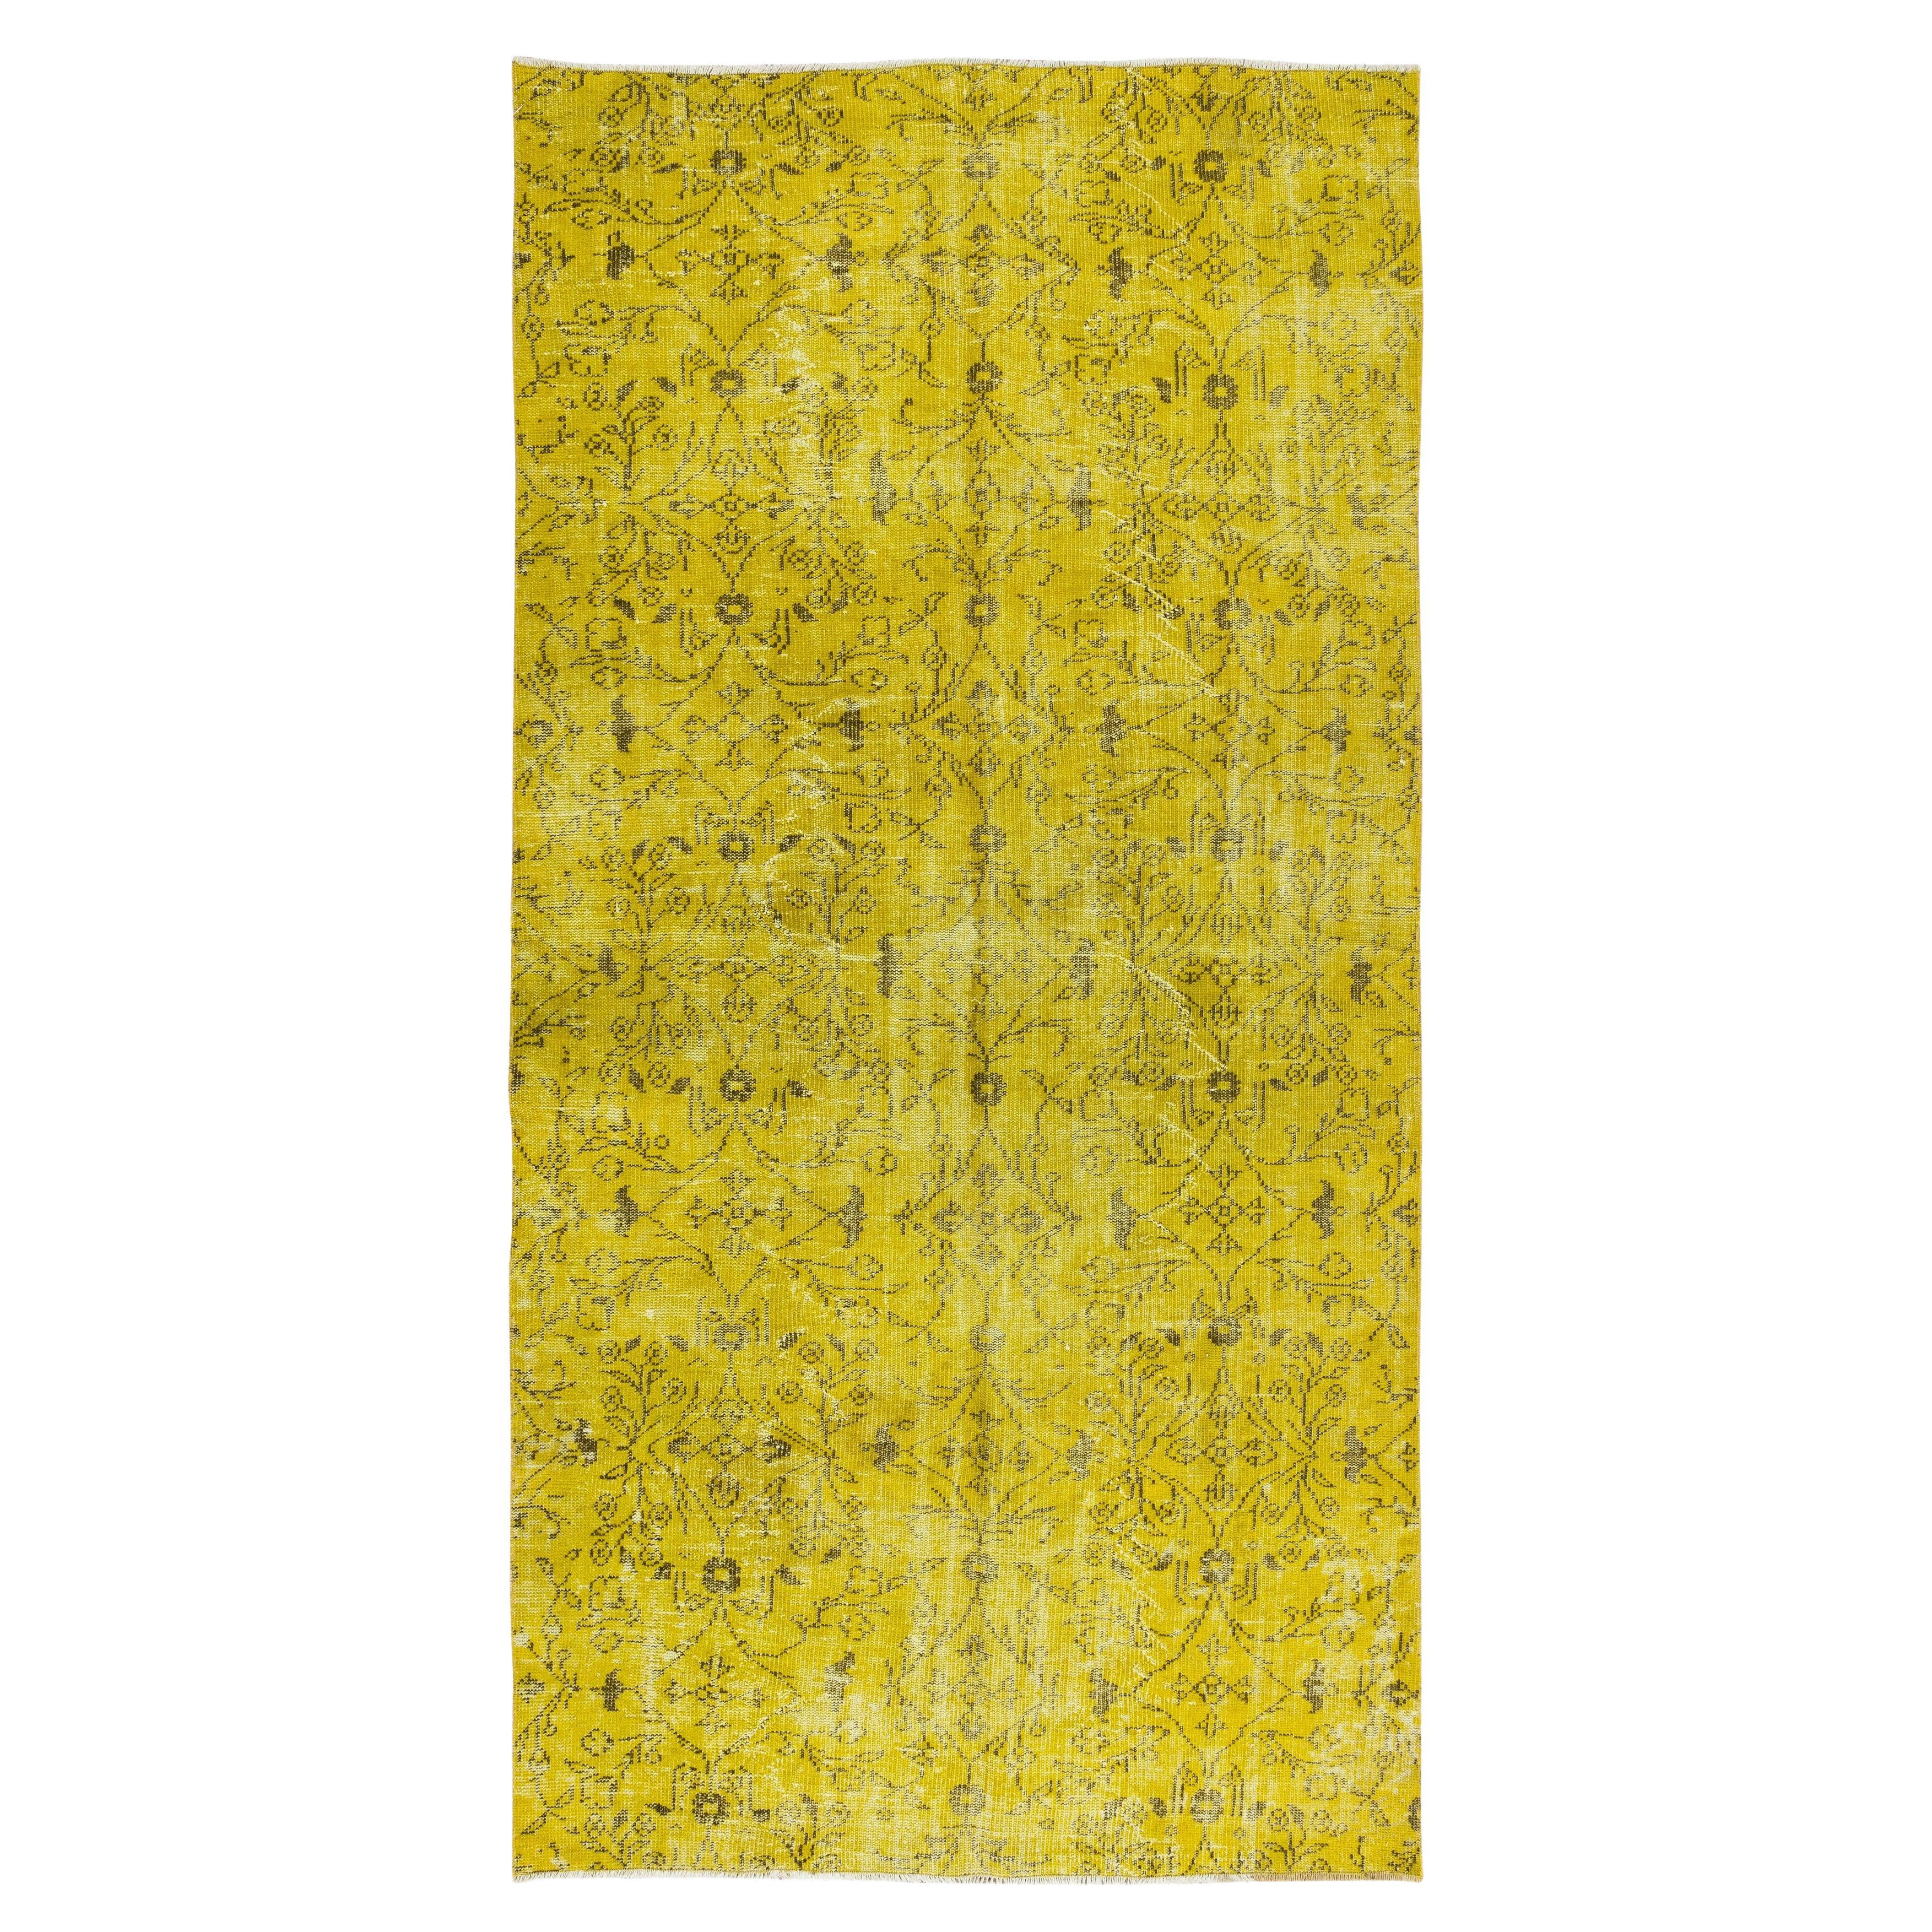 4.9x9.4 Ft Turkish Wool Rug Over-Dyed in Yellow for Modern Home & Office Decor